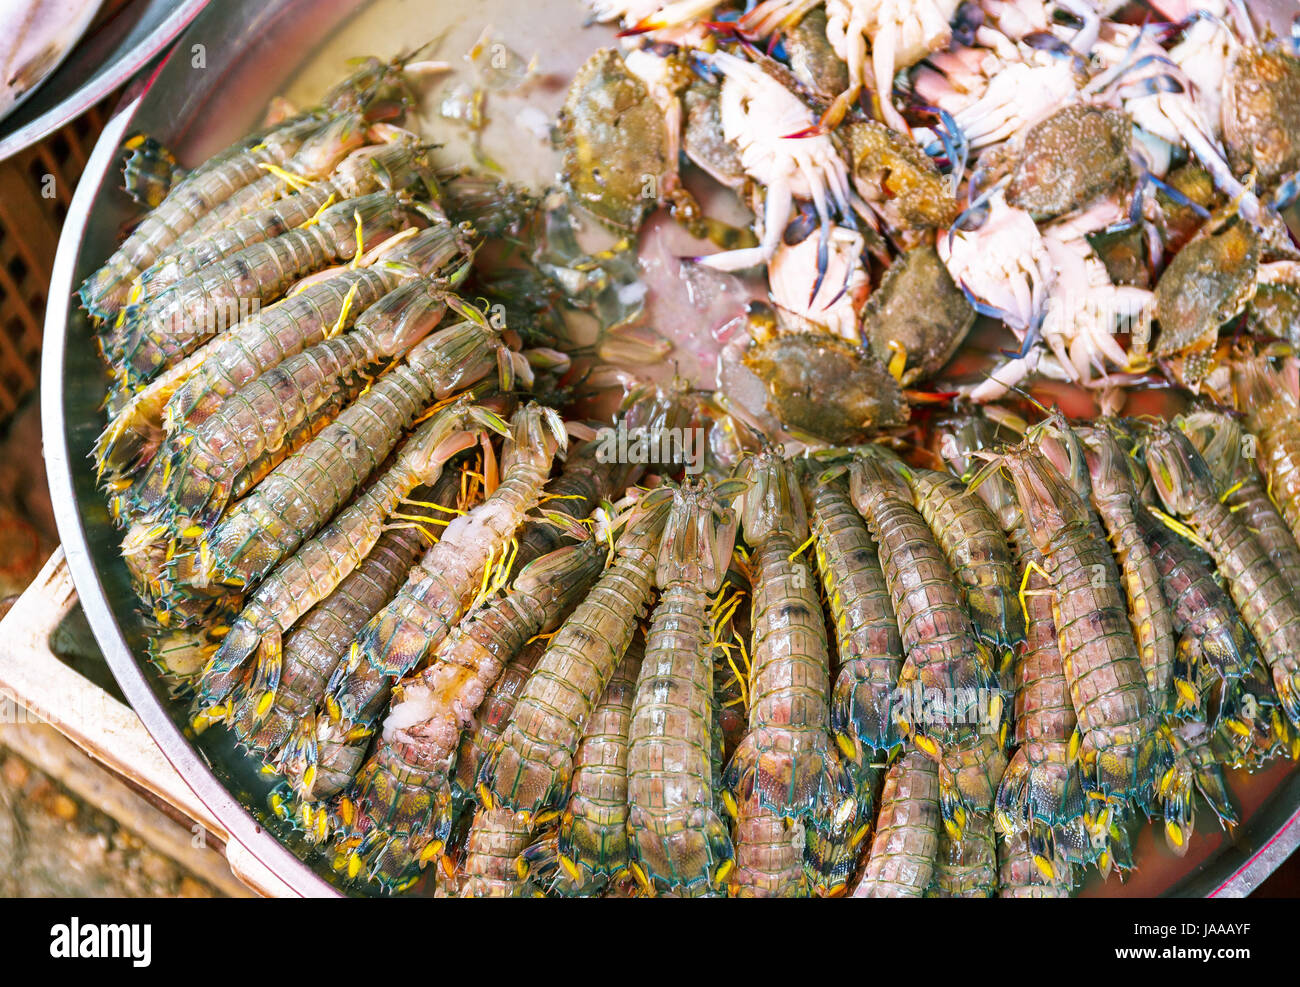 Fresh seafood in the wet market Stock Photo